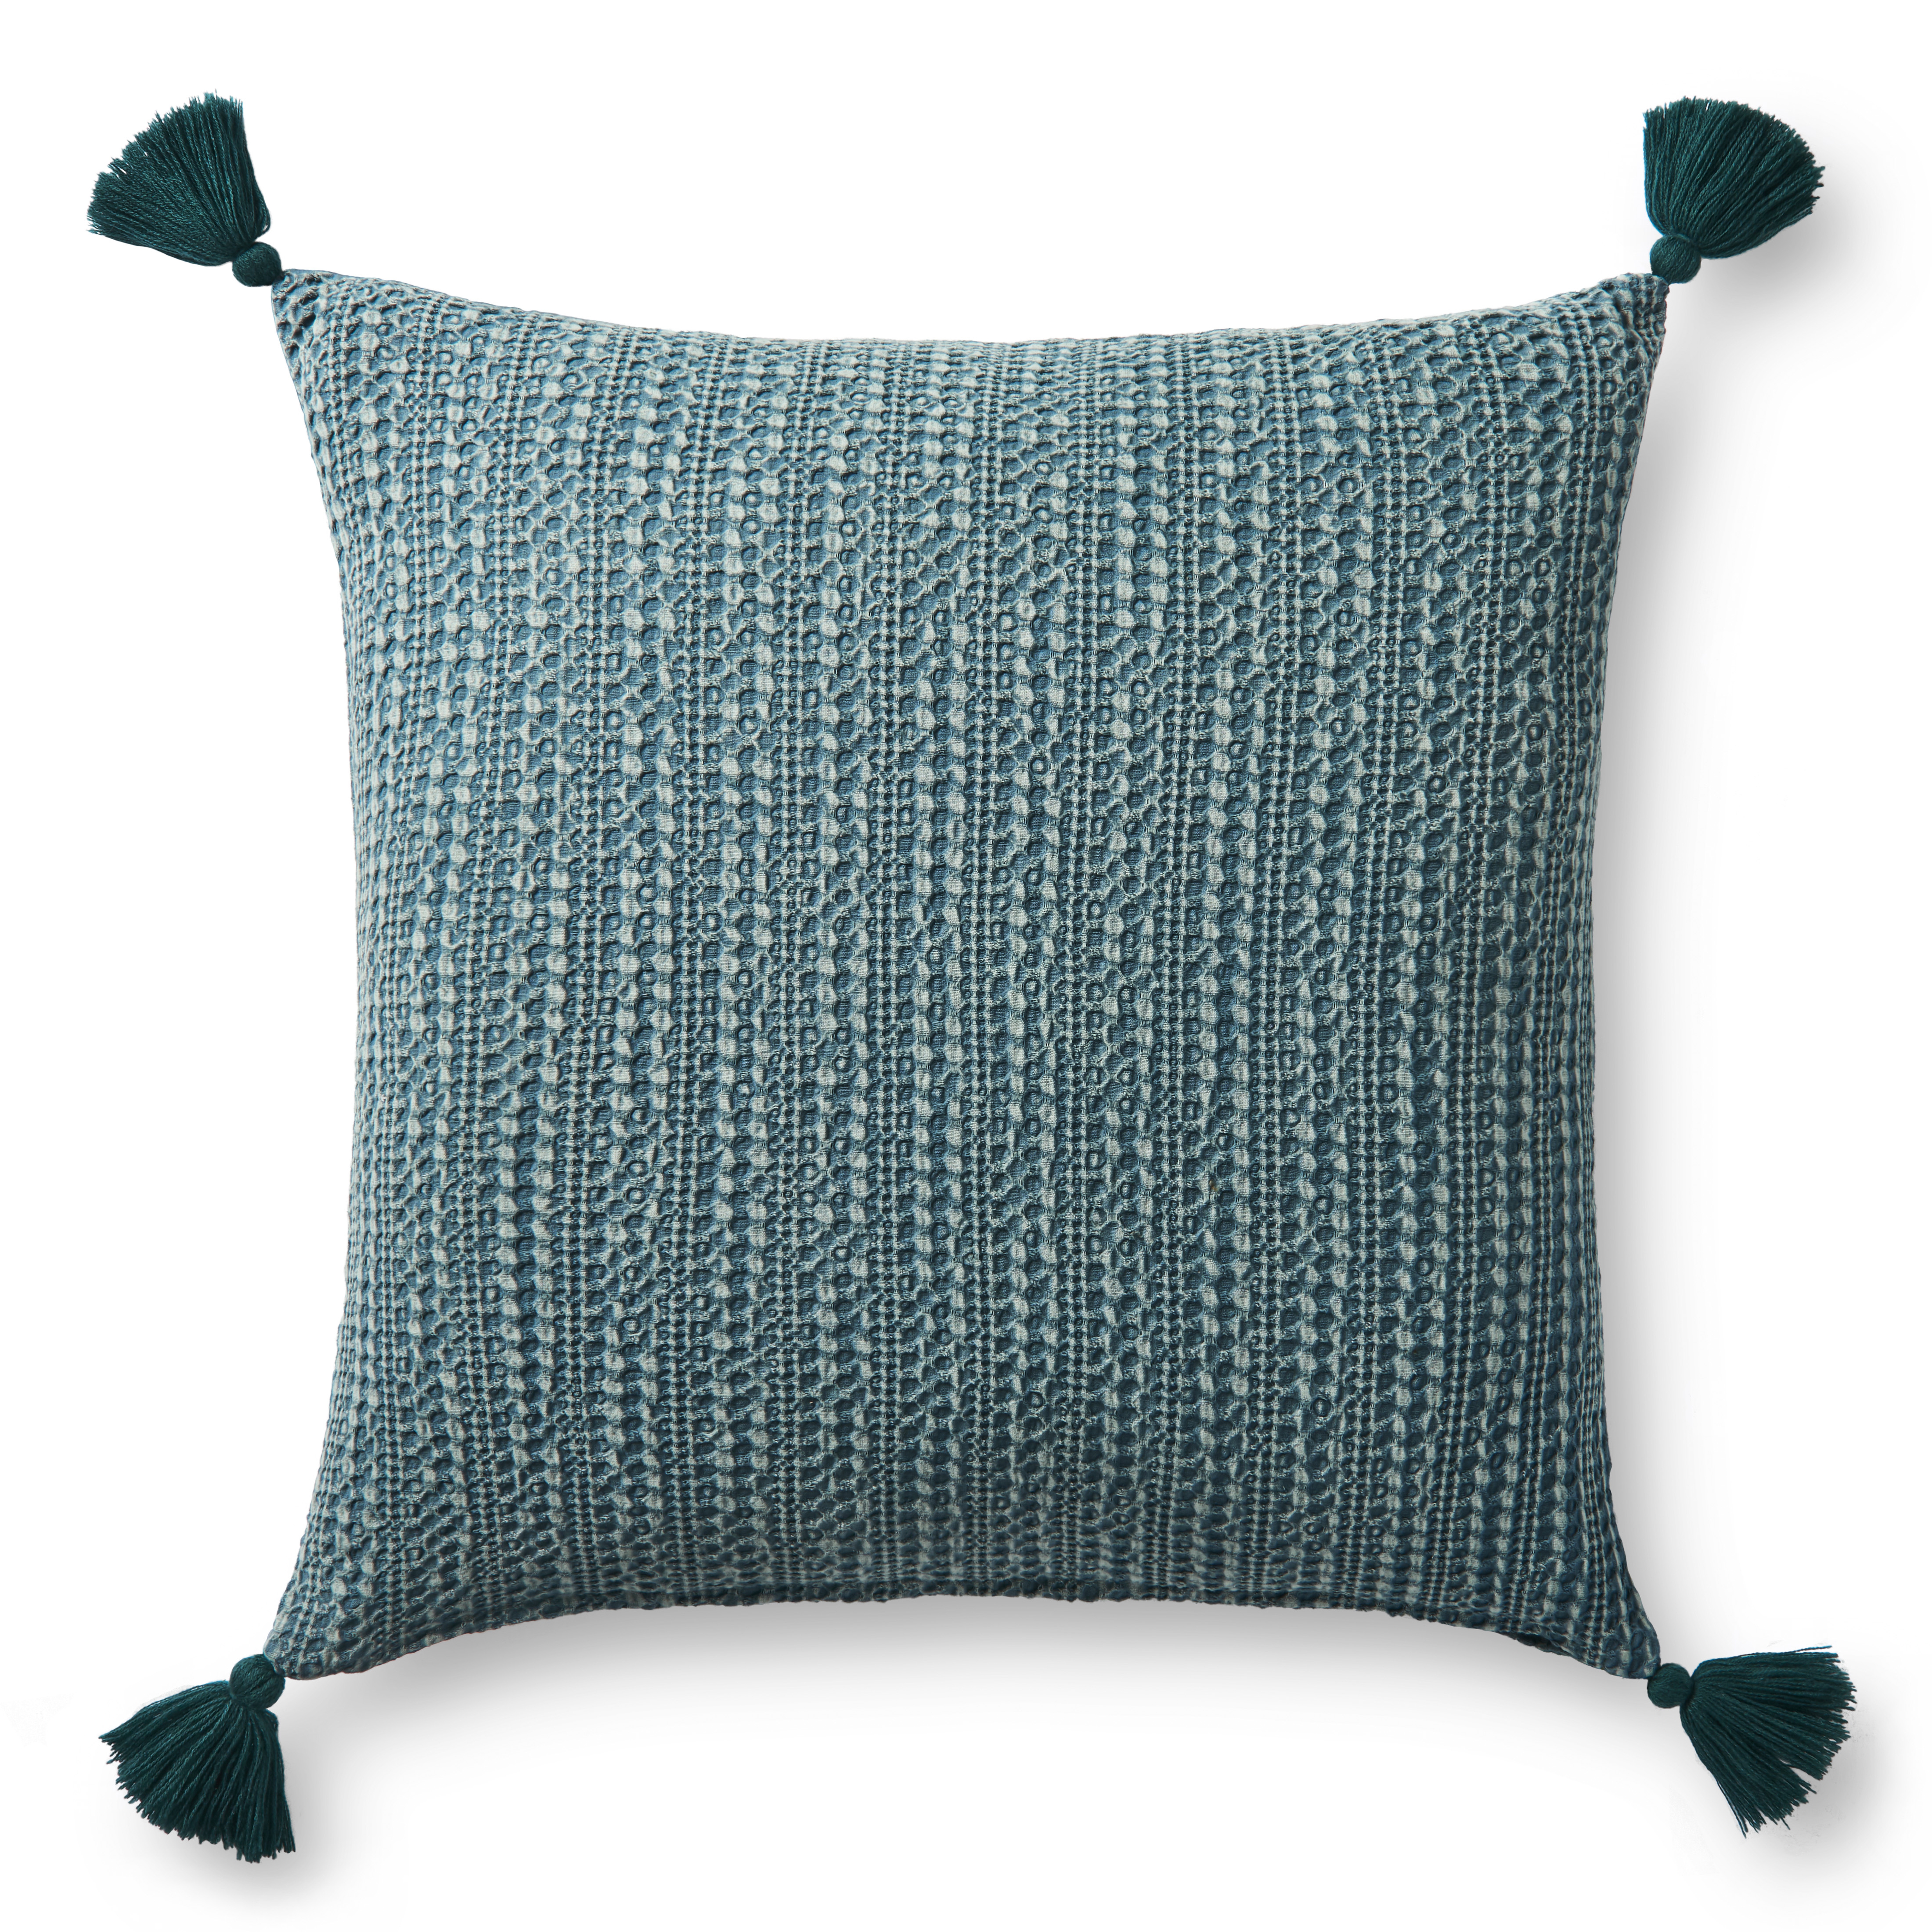 Loloi PILLOWS P0813 Green 22" x 22" Cover Only - Loloi Rugs